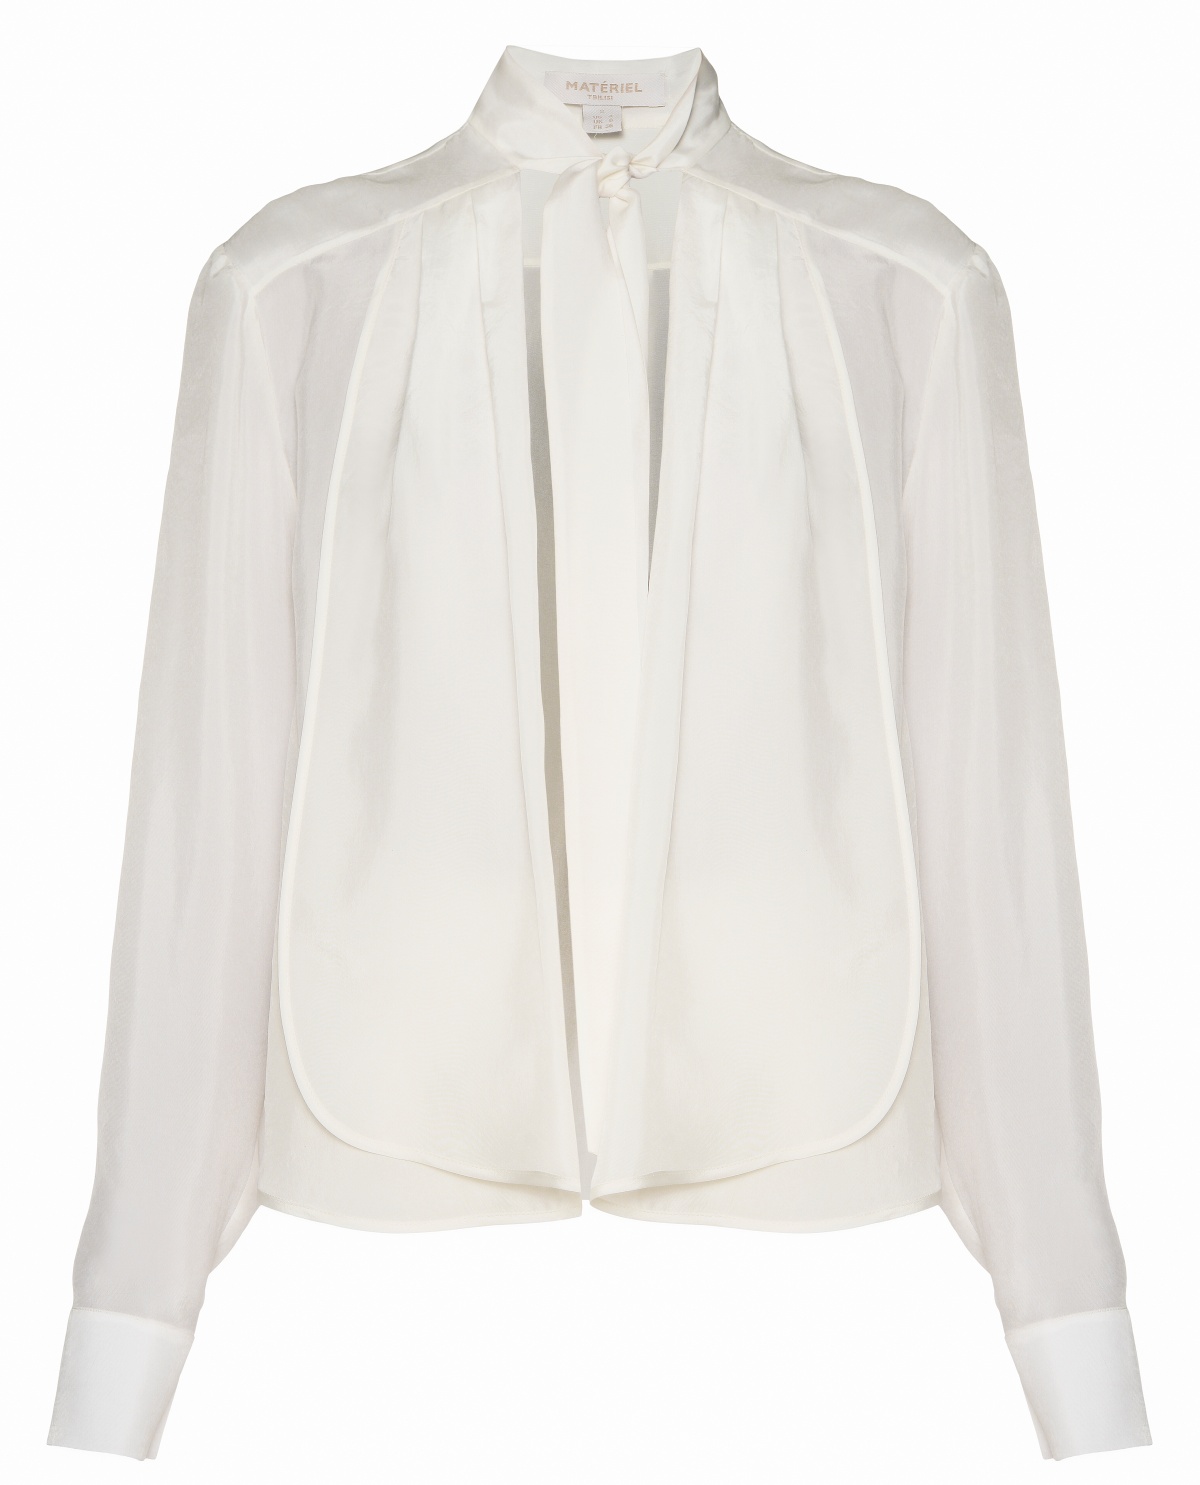 MORE is LOVE | Materiel - White Blouse - Tops